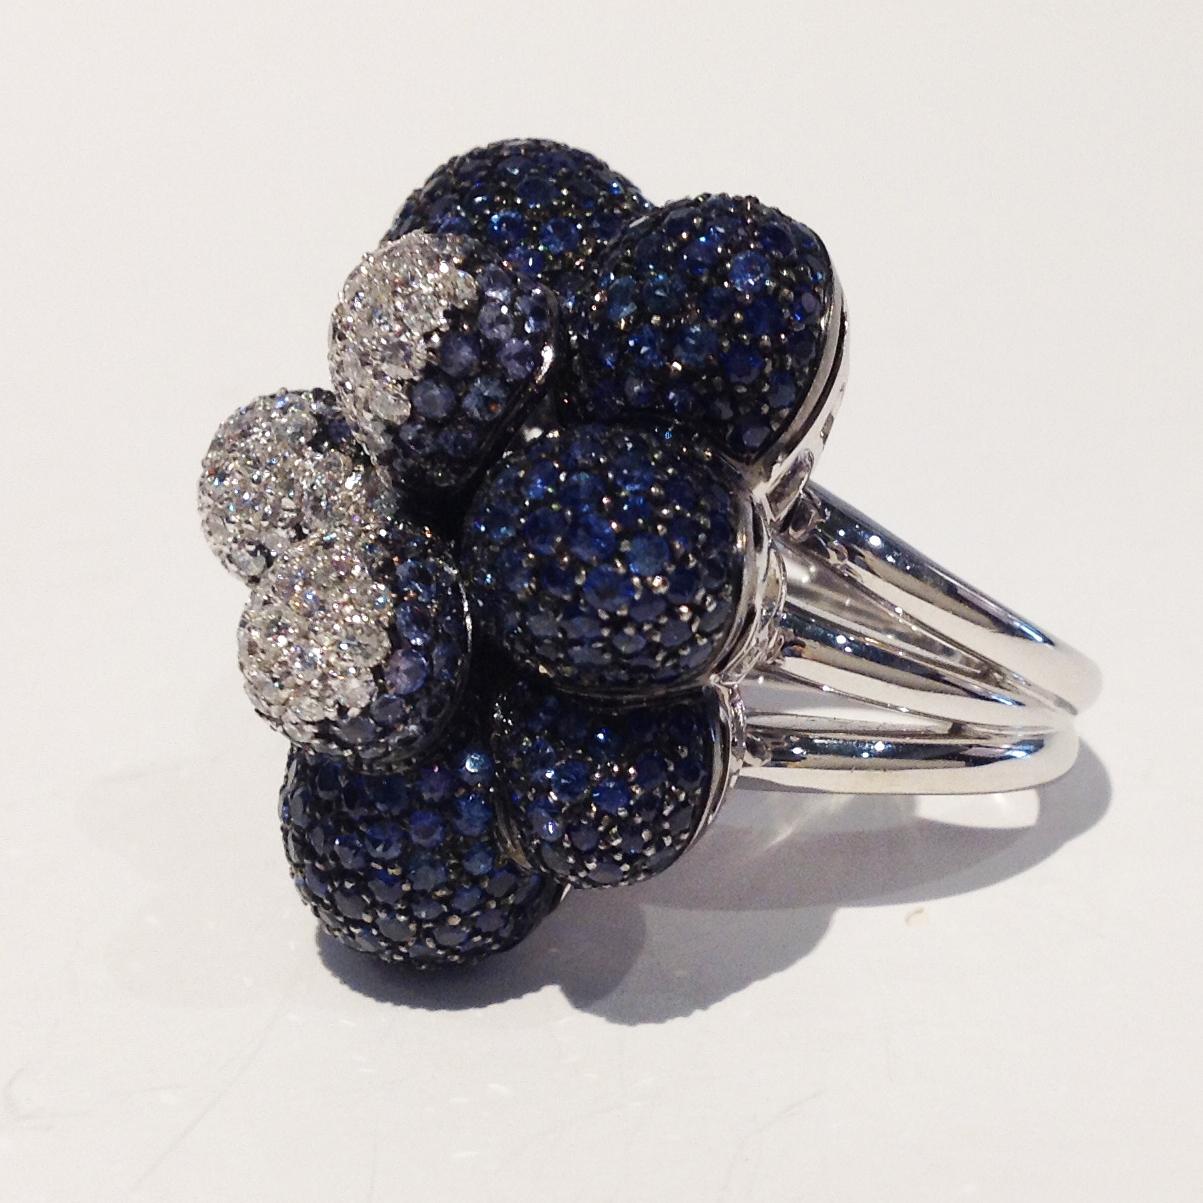 Ring in 18kt white gold which sets Blue Sapphires for 10,72cts, White Diamonds for 1,33cts.

Unique piece, designed and handcrafted in Italy, by visionary goldsmith Paolo Piovan. 

Paolo Piovan Jewels, creations of the purest expression of Italian